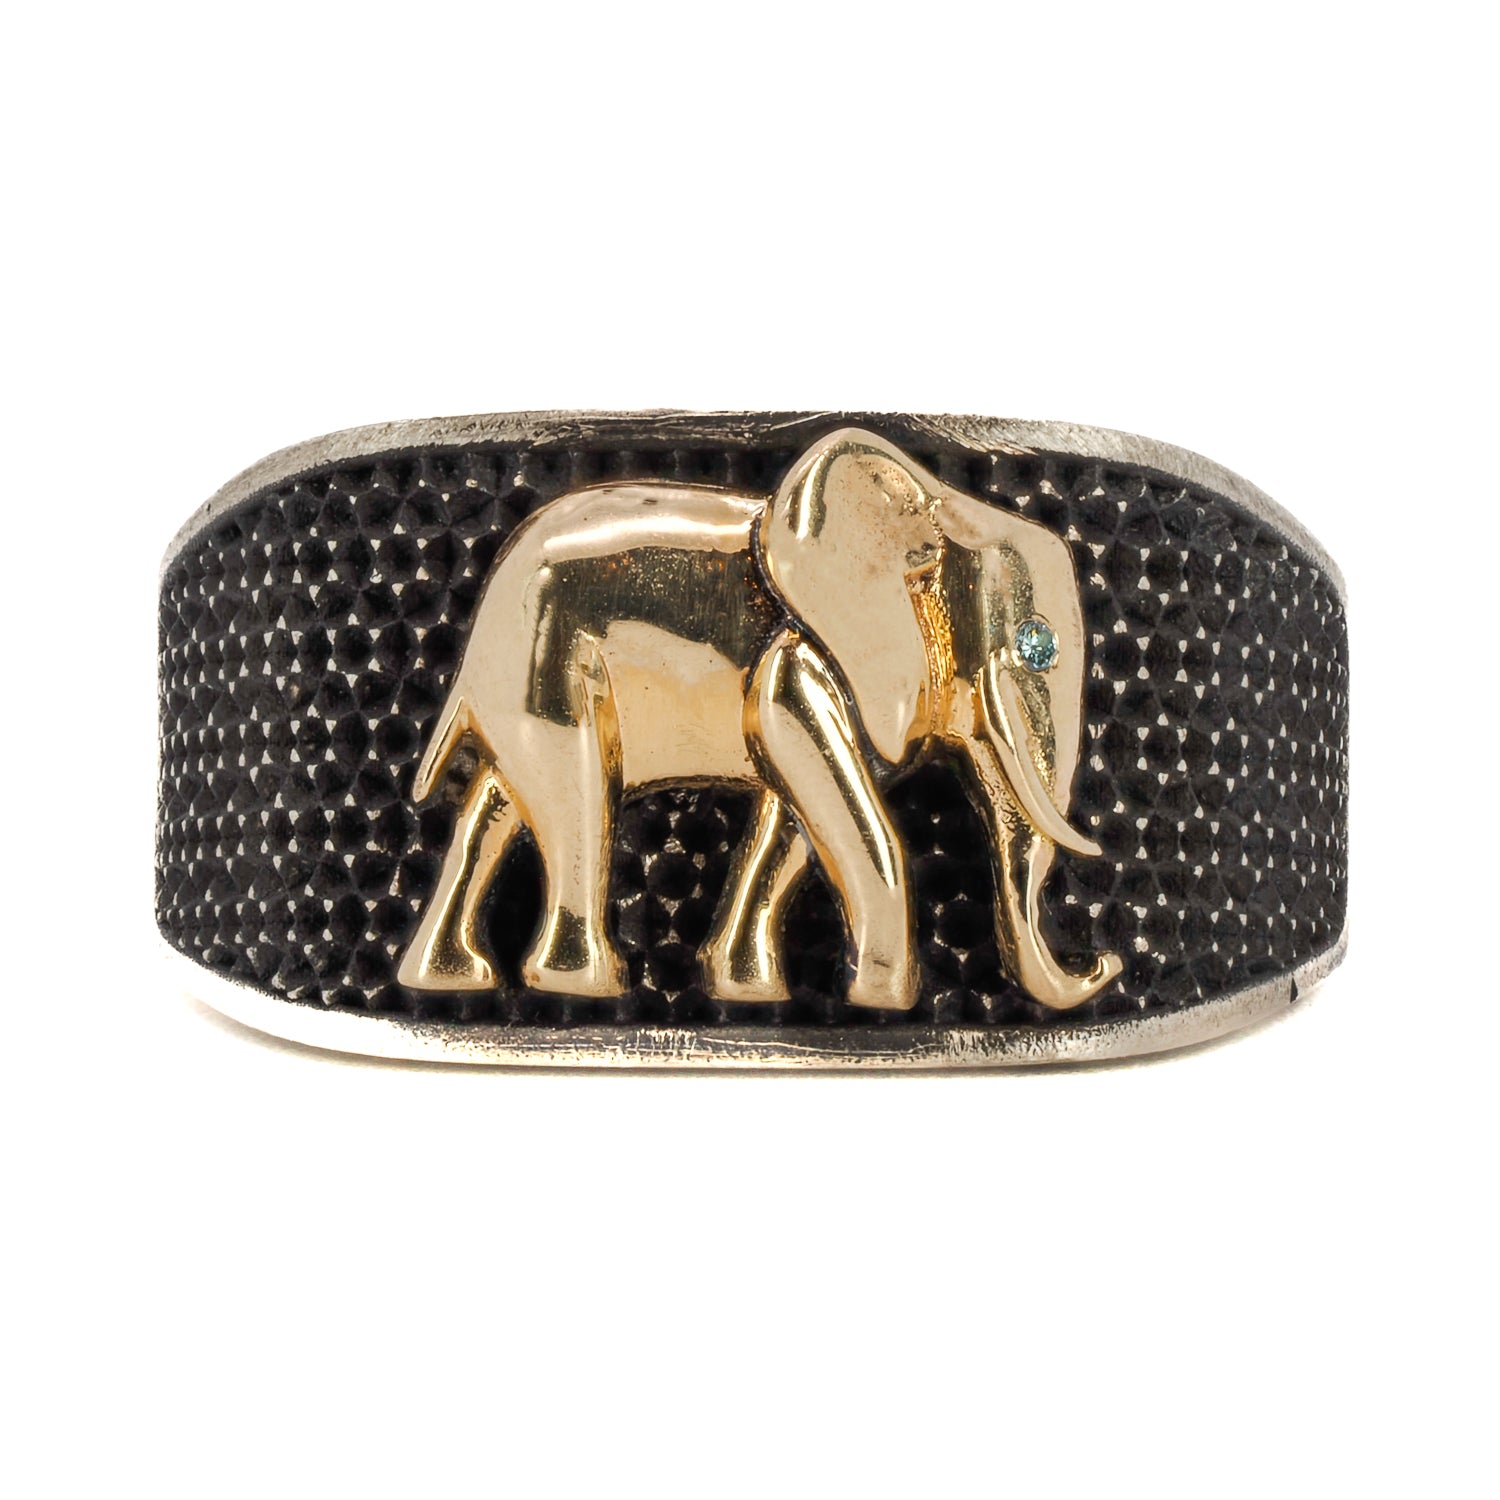 Unique Silver and Gold Elephant Ring - Handcrafted with Care.